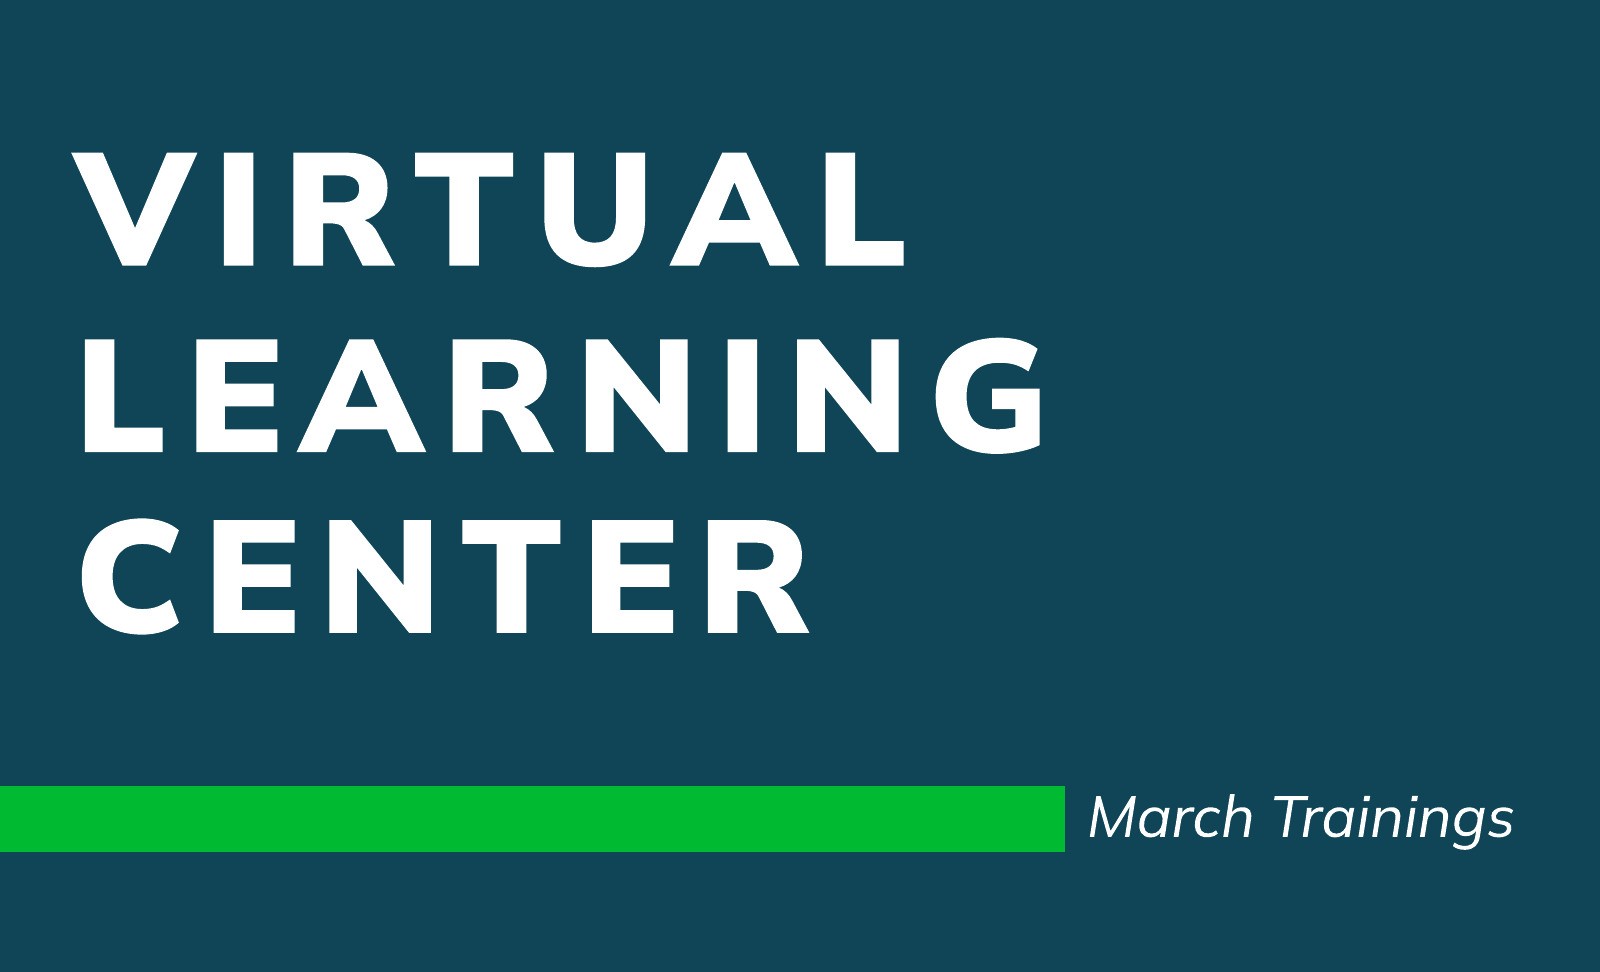 Virtual Learning Center, March Trainings